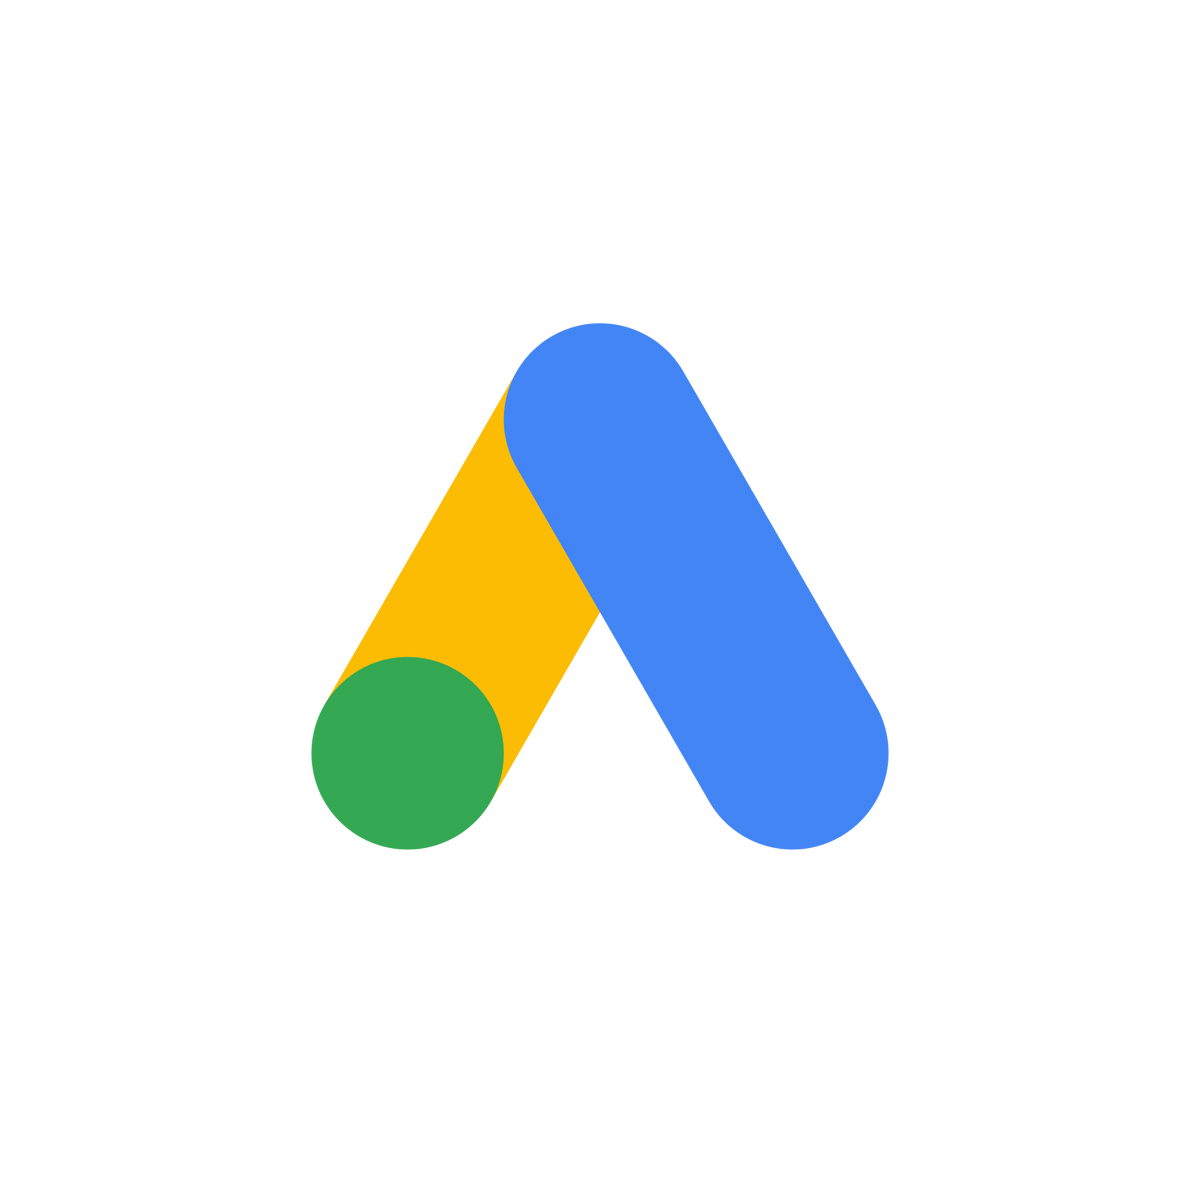 Google Ads (AdWords) reports